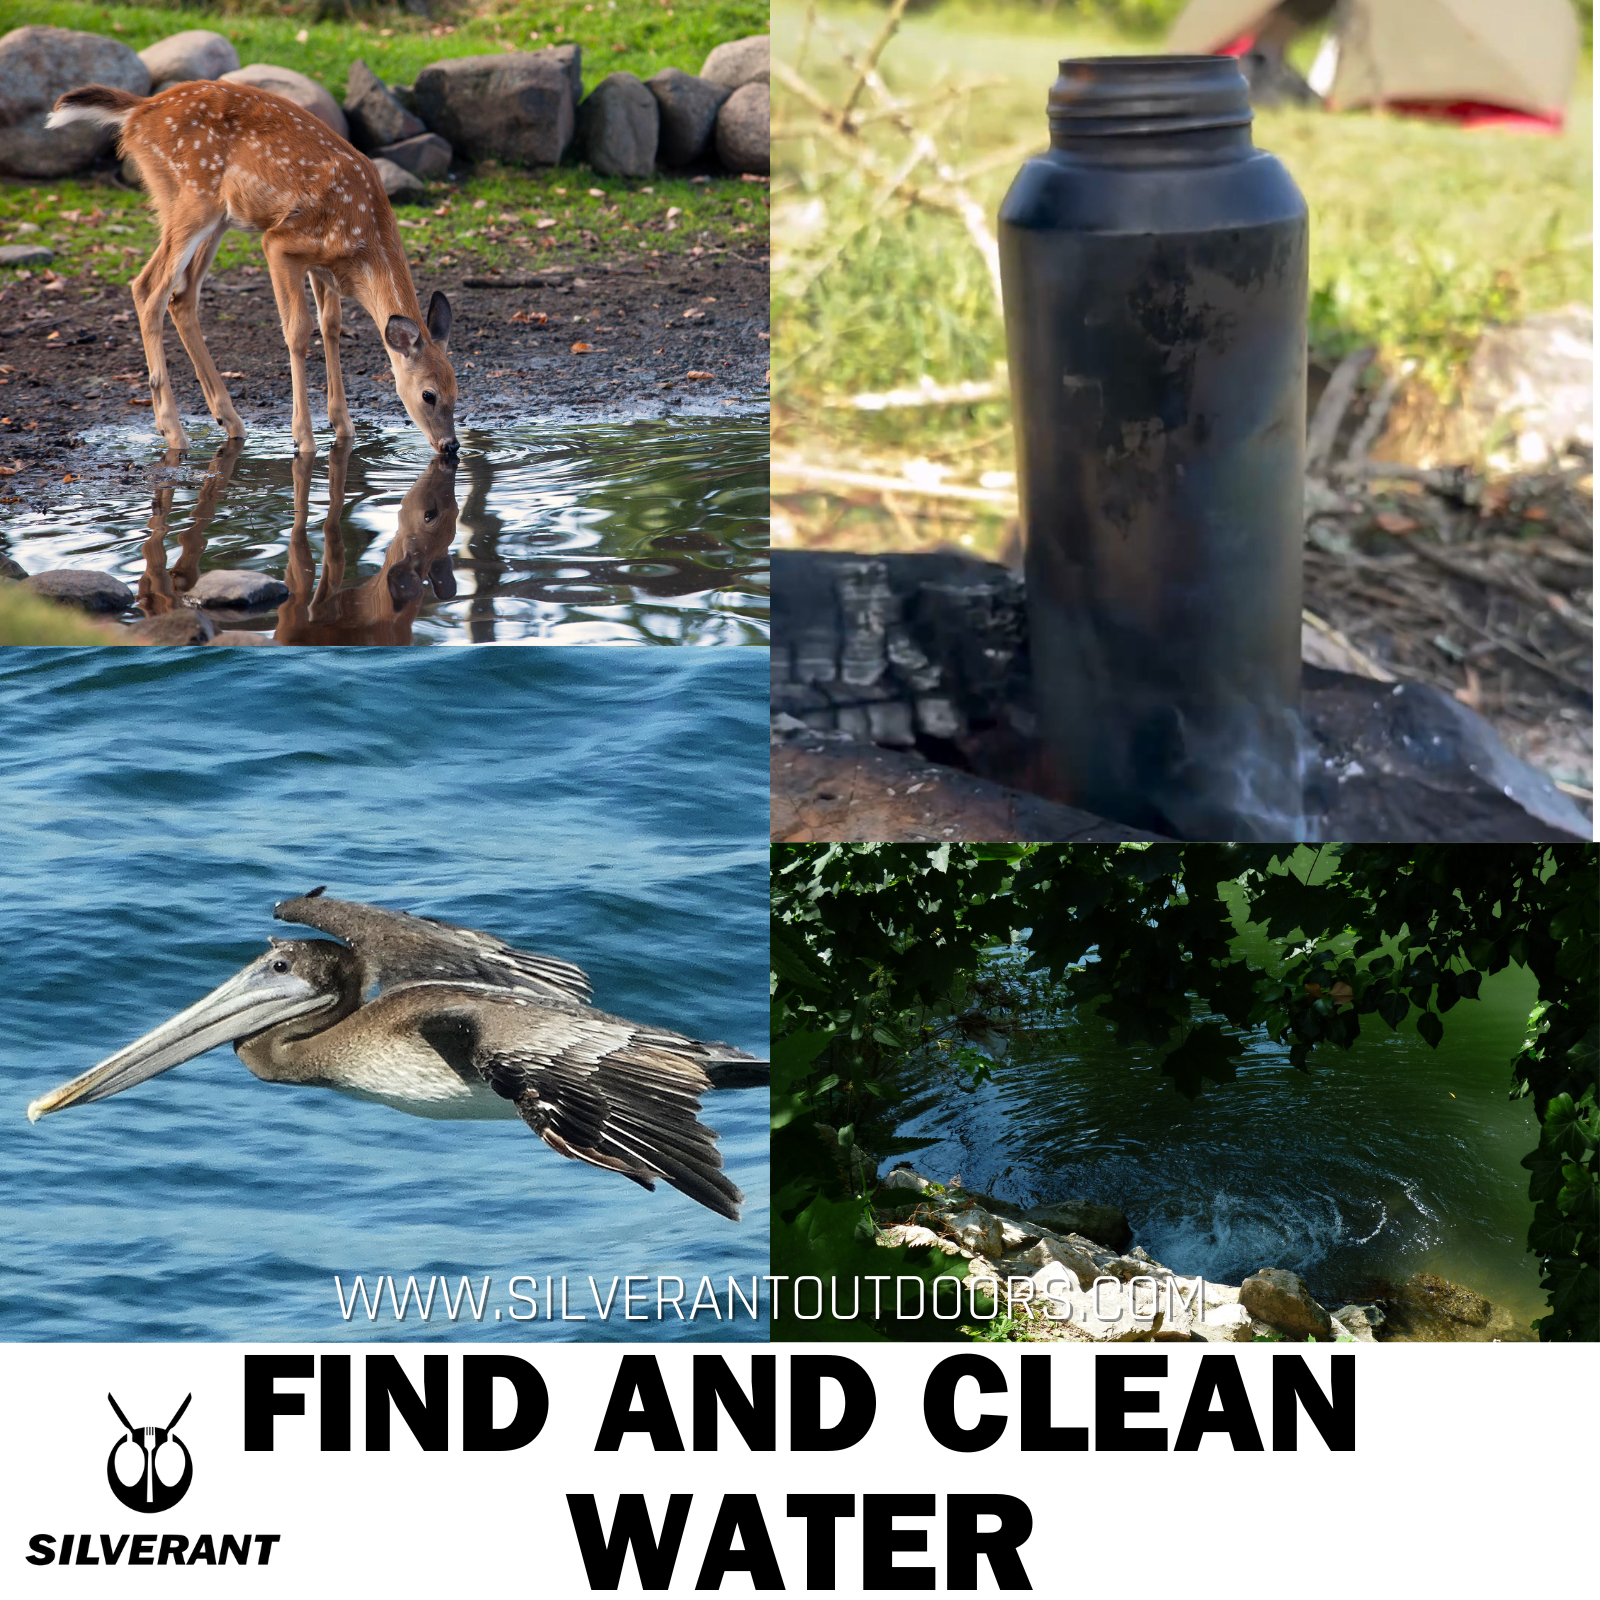 Find and clean water - SilverAnt Outdoors